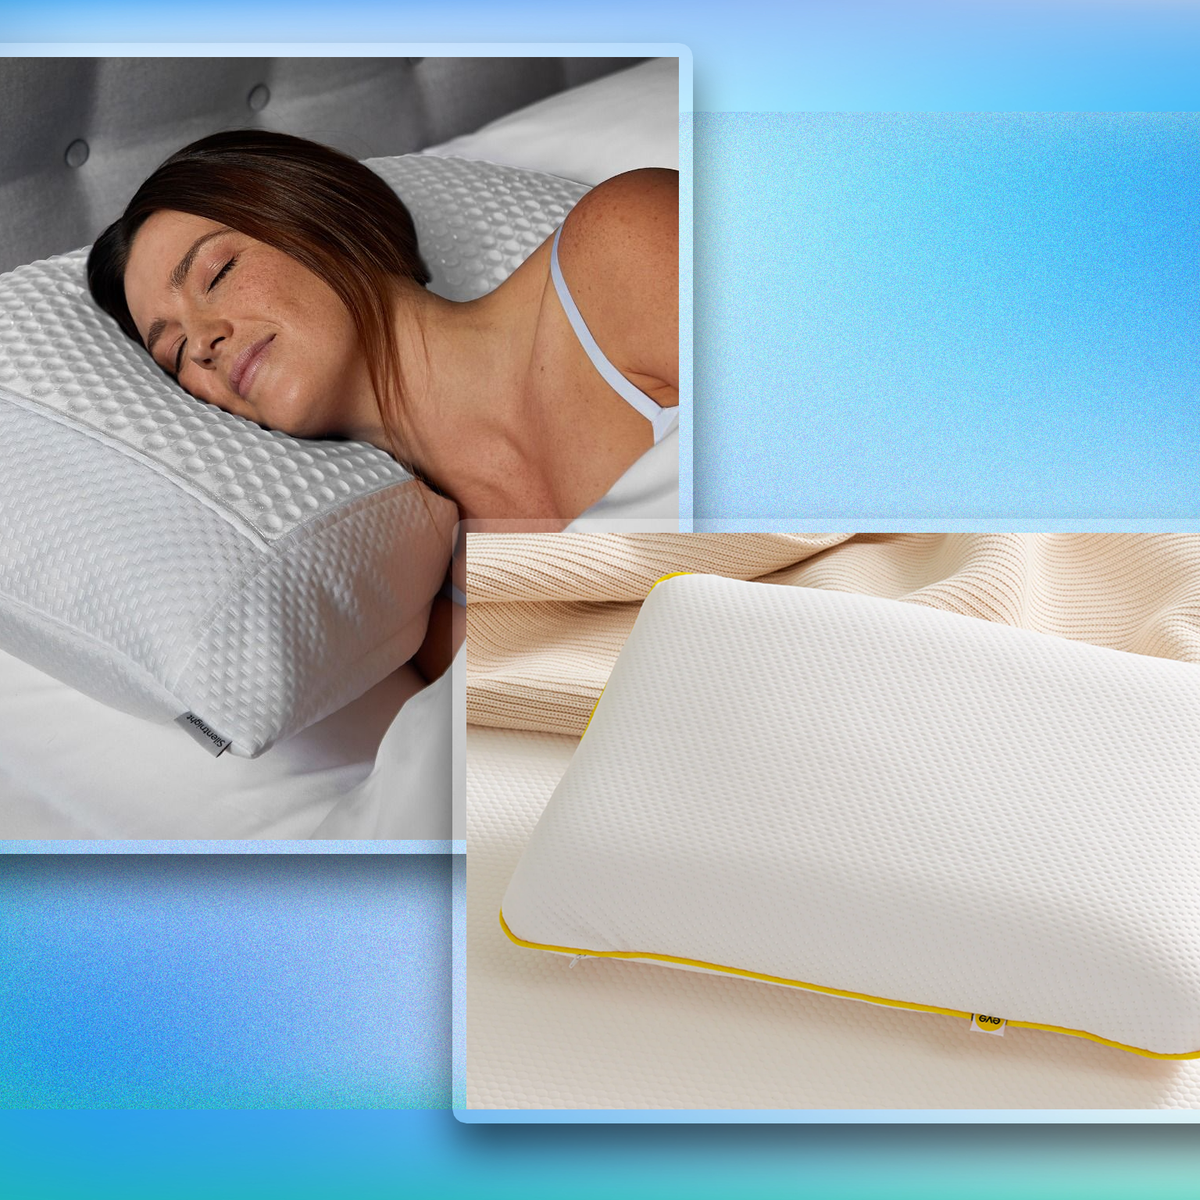 https://static.independent.co.uk/2023/07/14/11/Cooling%20pillows.png?width=1200&height=1200&fit=crop